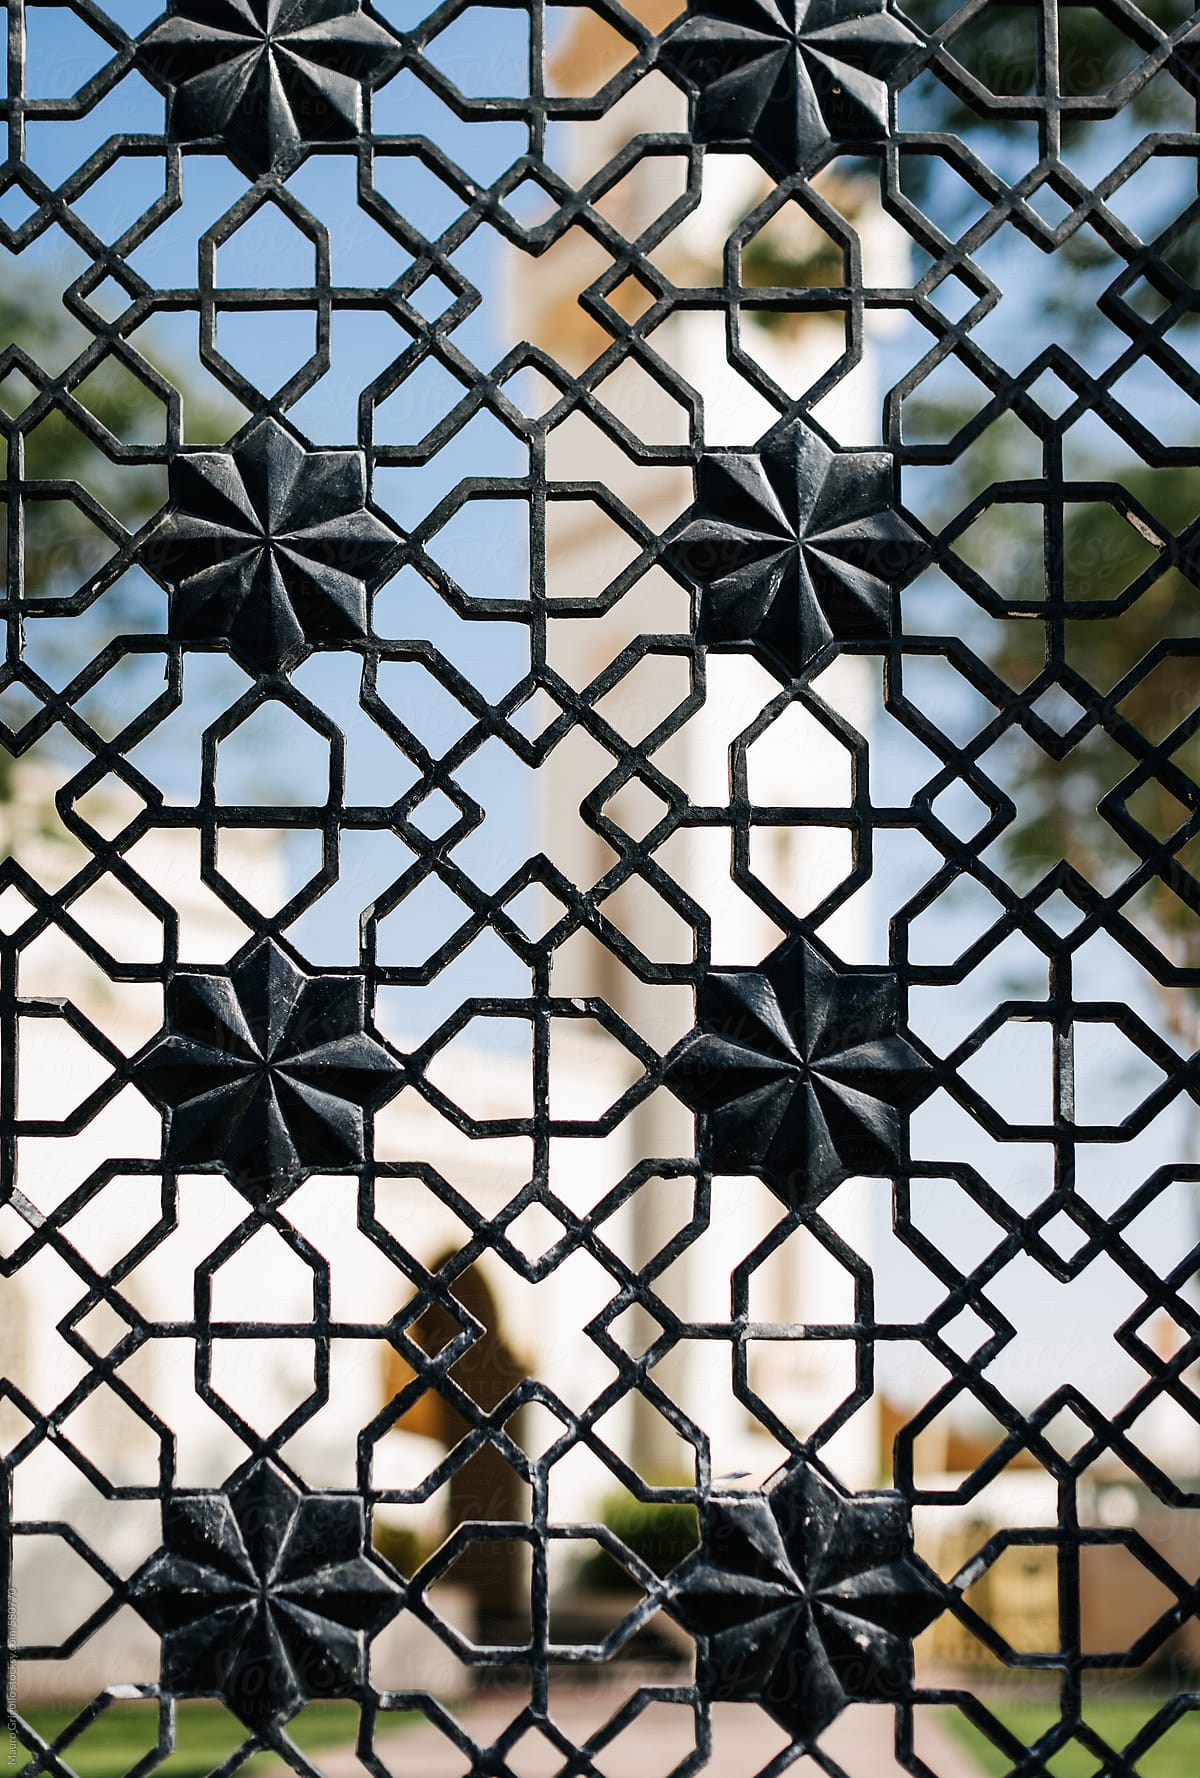 Fence of a Mosque in Dubai